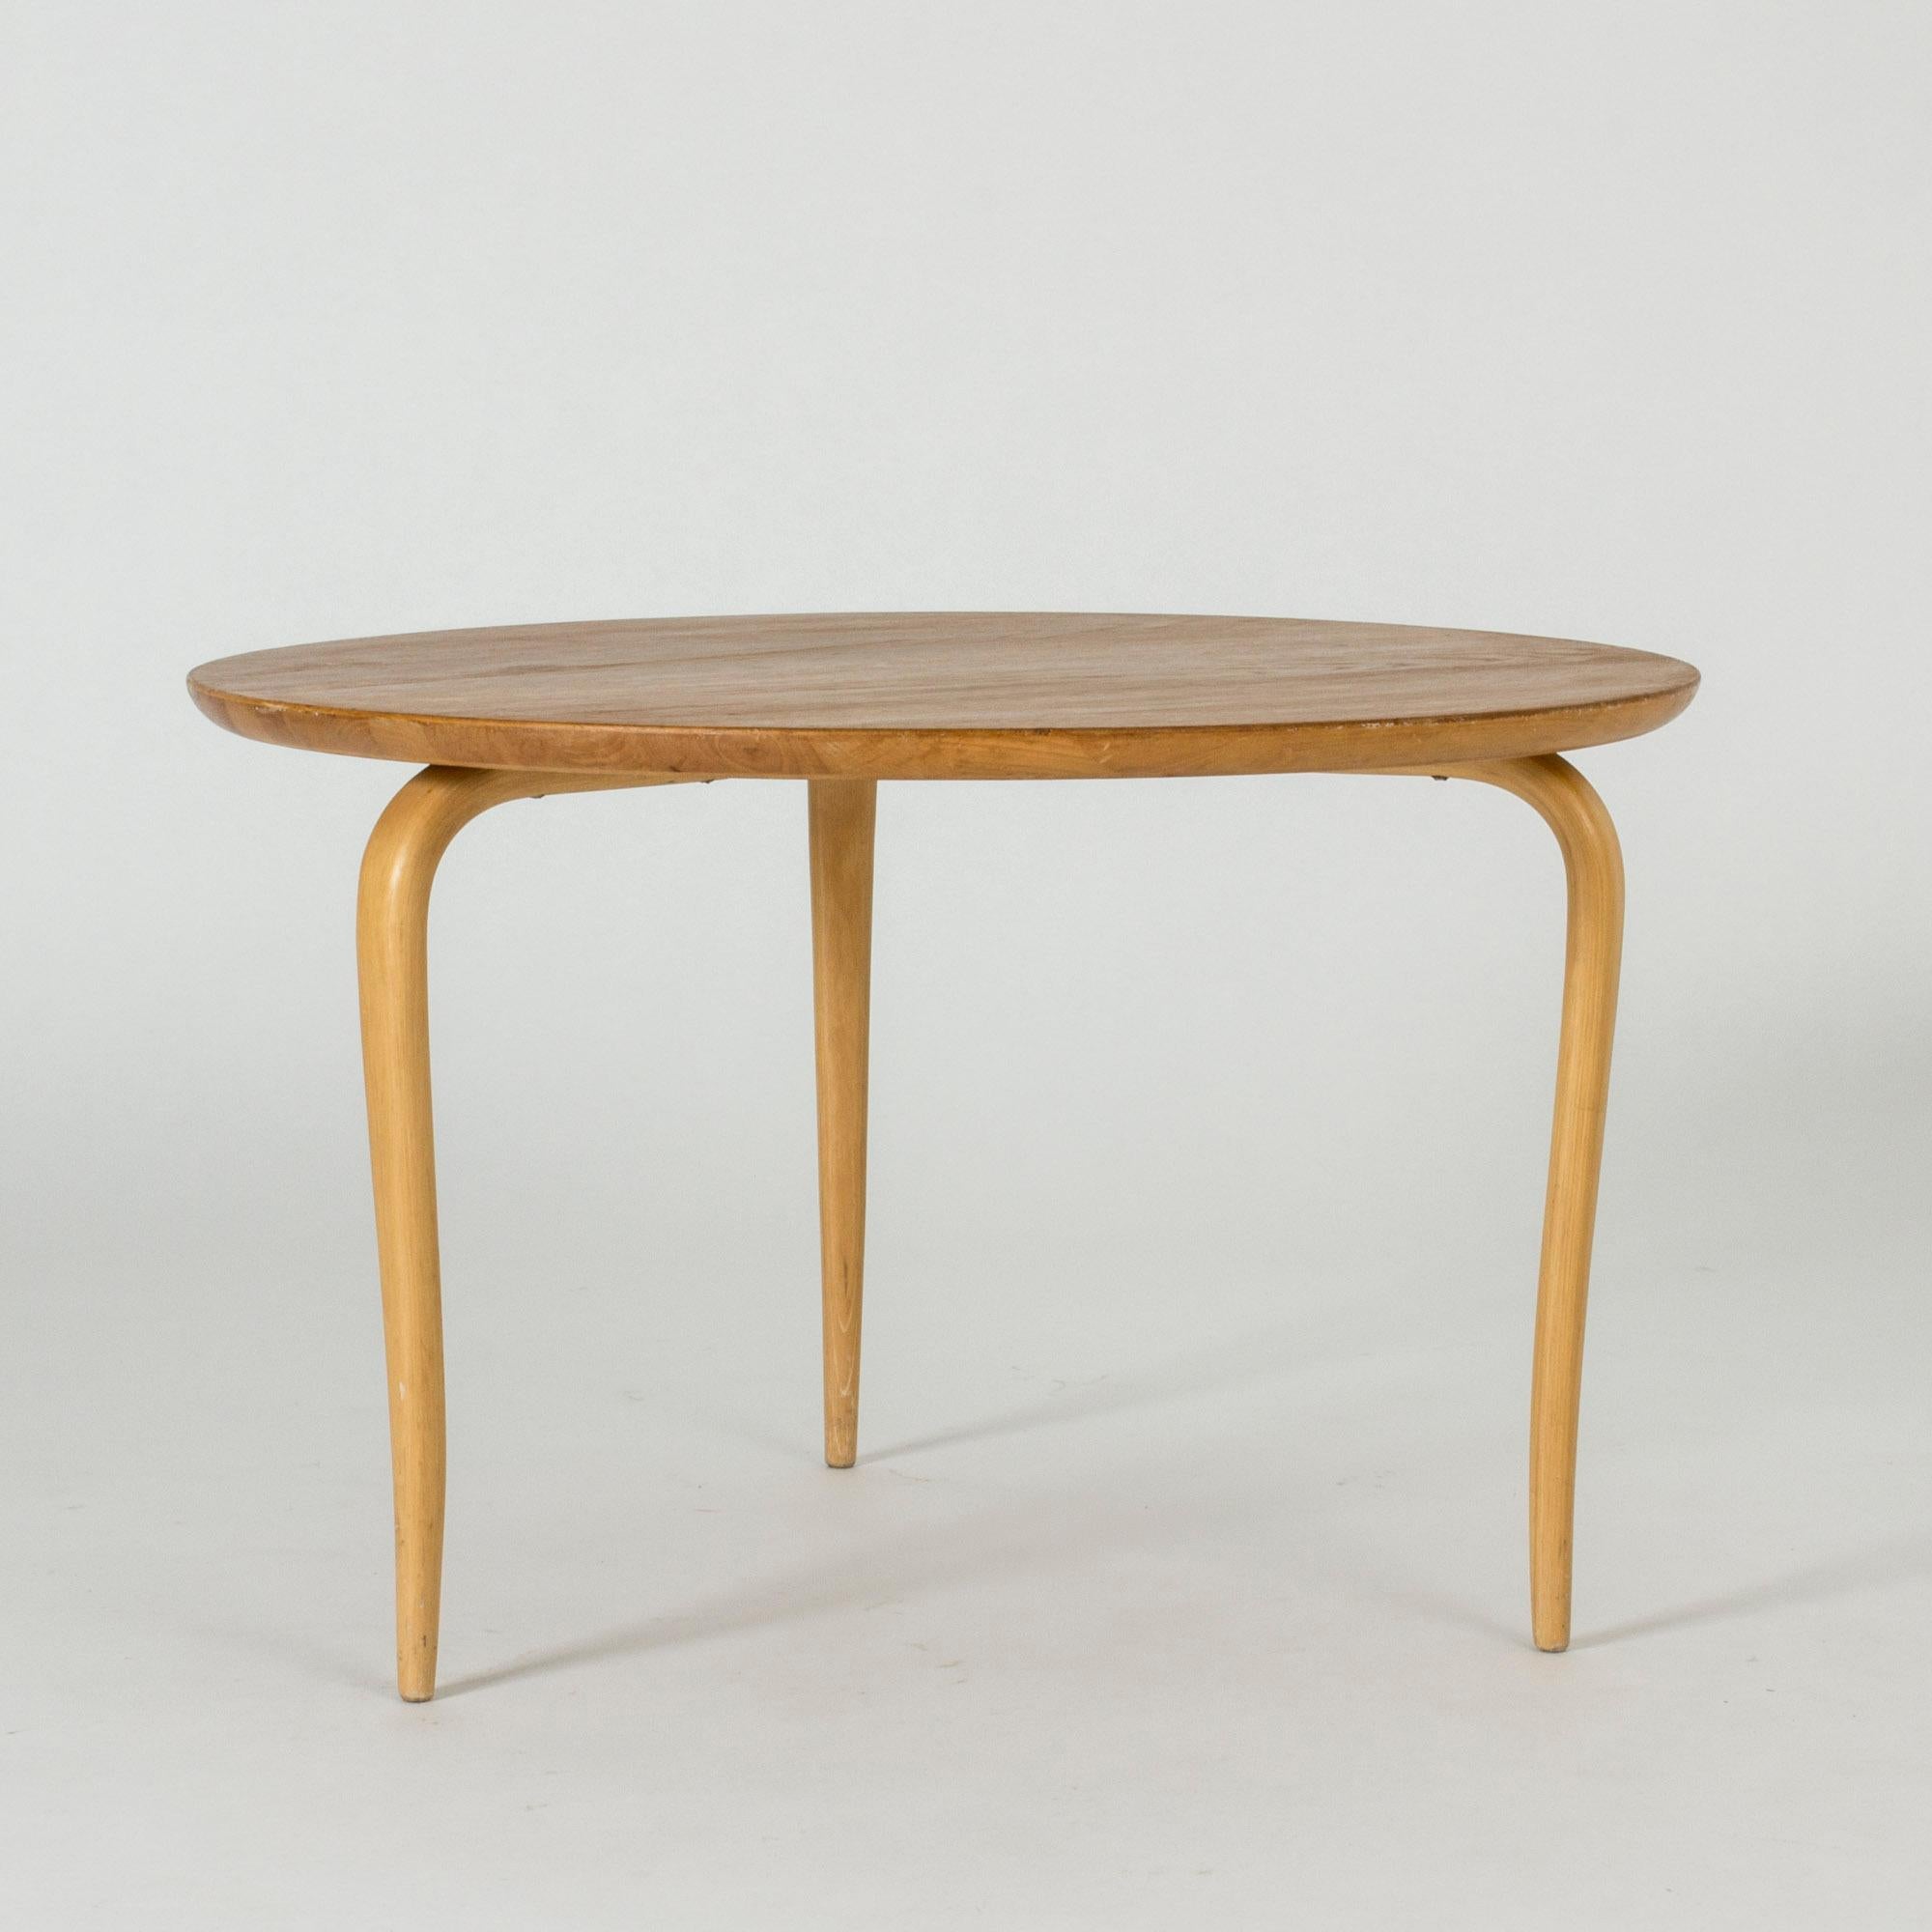 Beautiful “Annika” side or small coffee table by Bruno Mathsson. Round oak table top, slender legs made from beech.